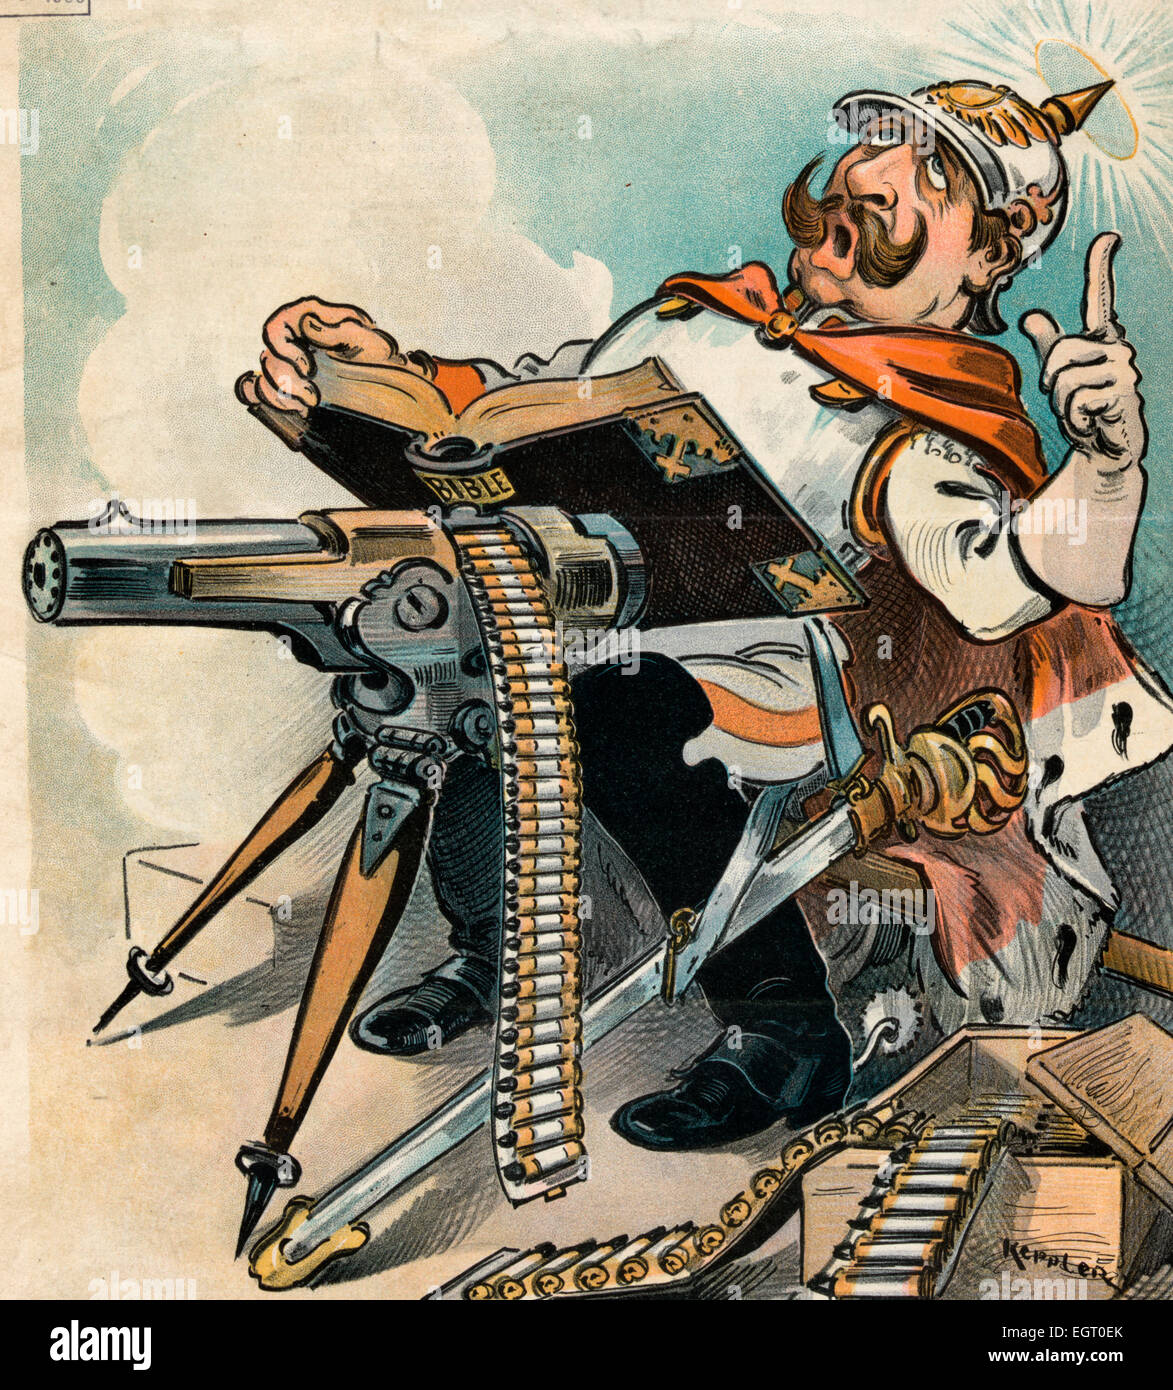 The Gospel according to St. William - Illustration shows William II, Emperor of Germany, with a Bible propped up on a gatling gun, reading aloud from the gospels; there is a box of ammunition at his feet. Political cartoon, 1900 Stock Photo